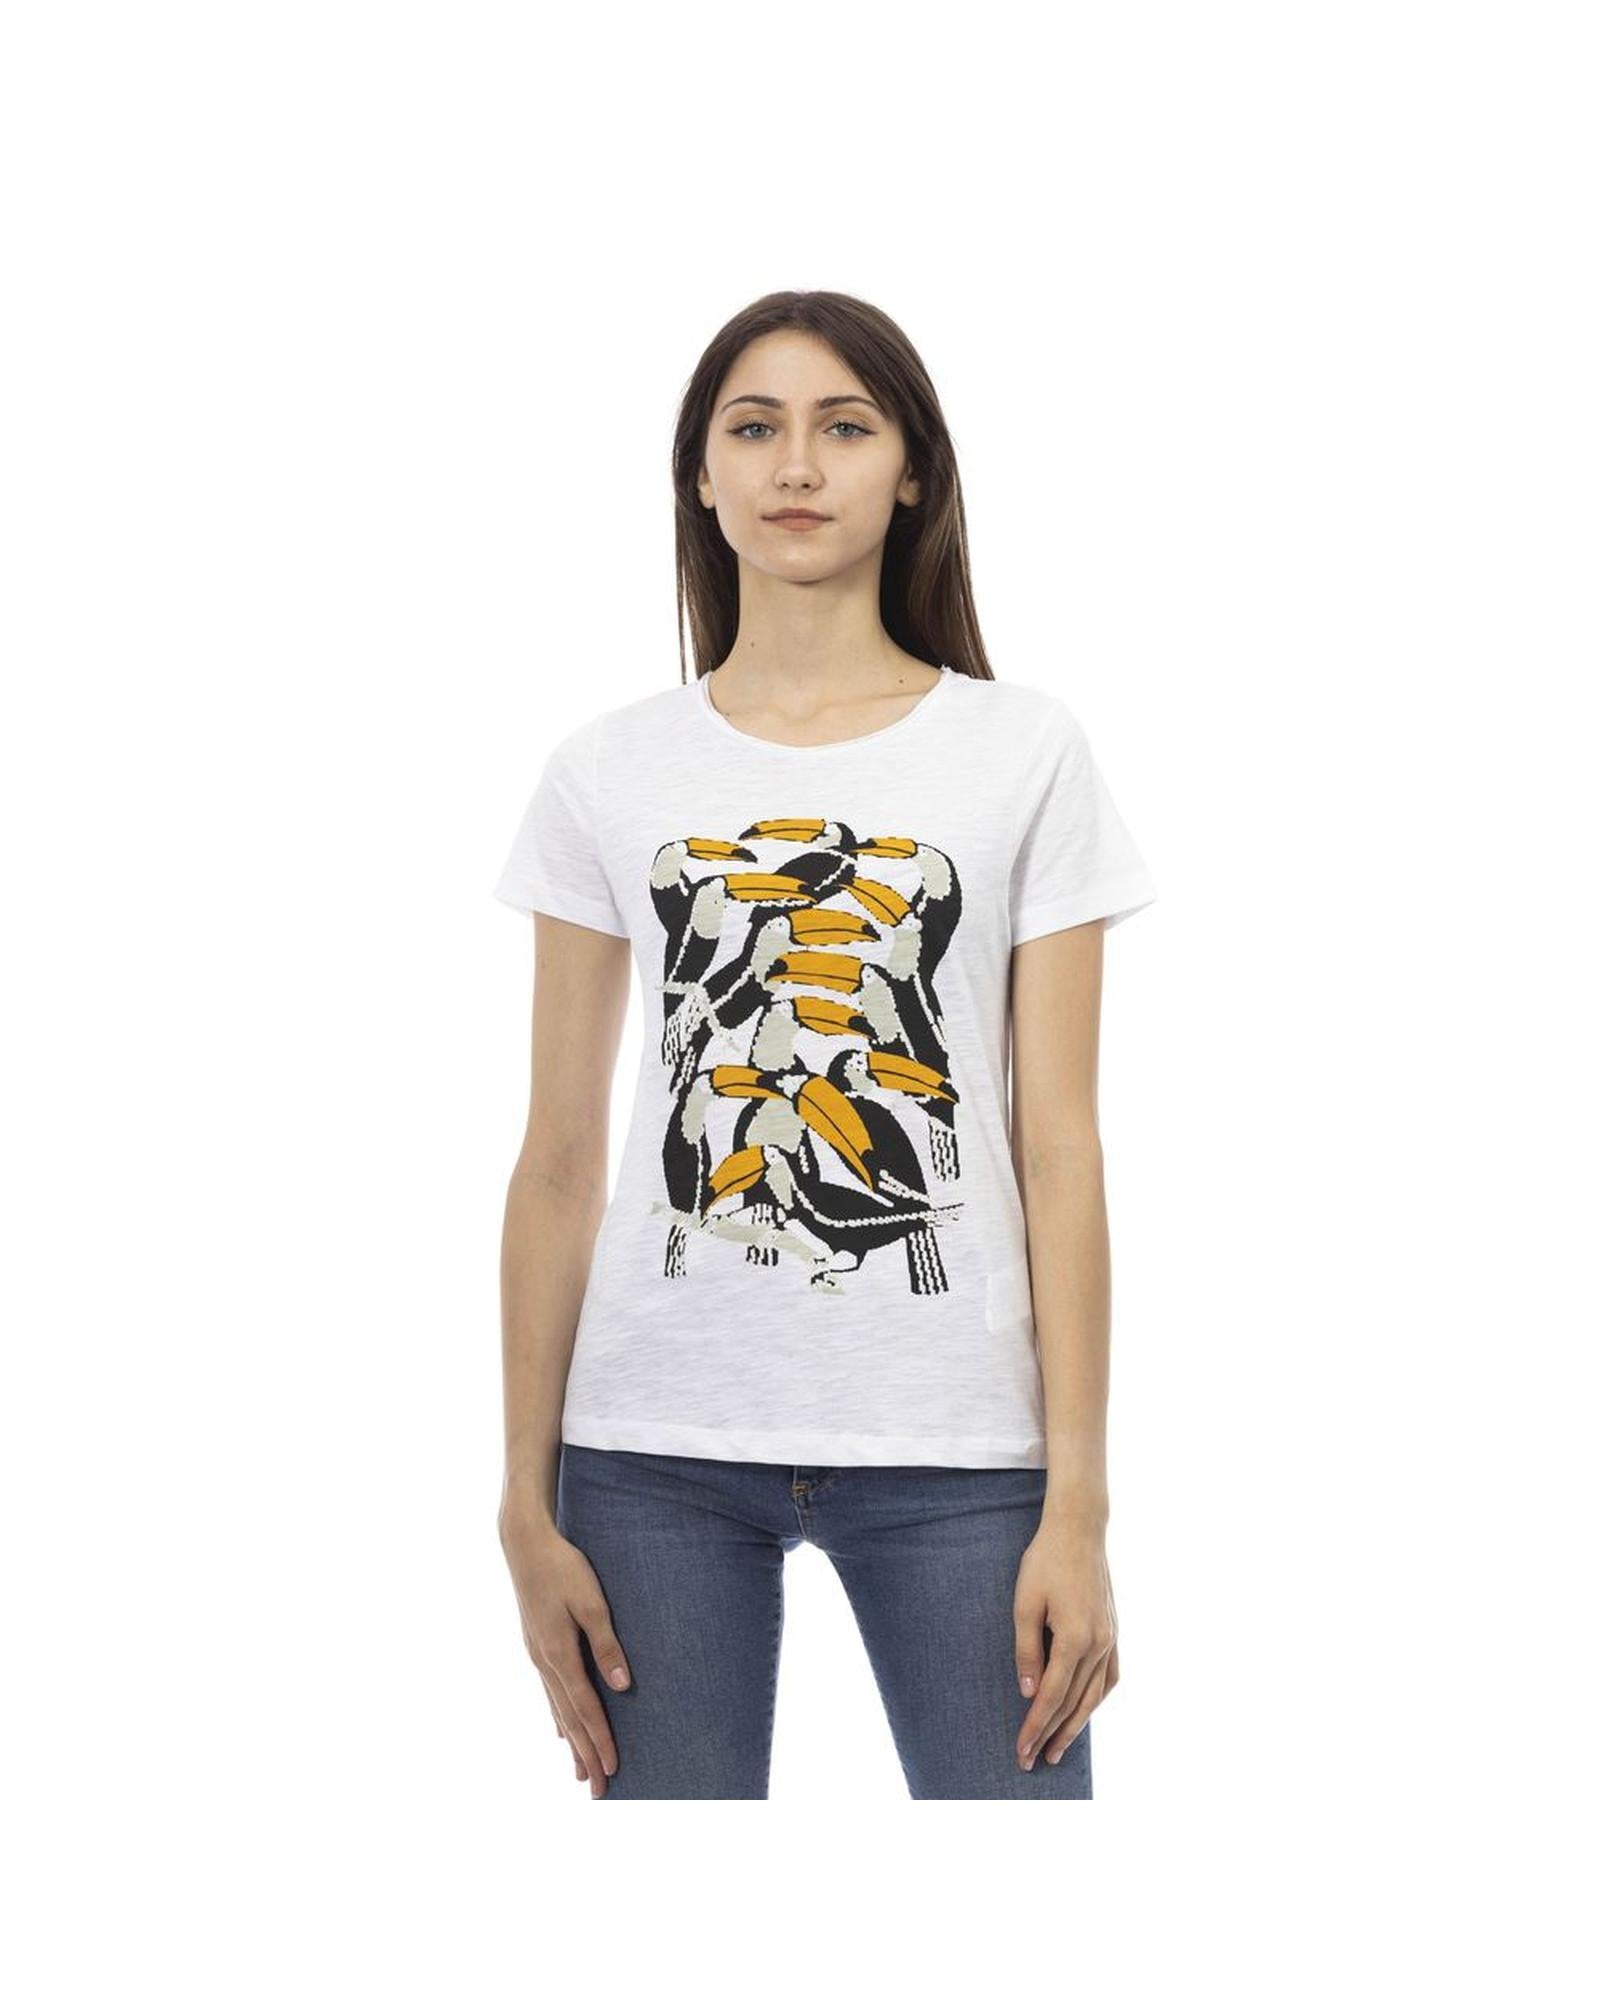 Women's Chic White Short Sleeve Tee with Exclusive Print - M